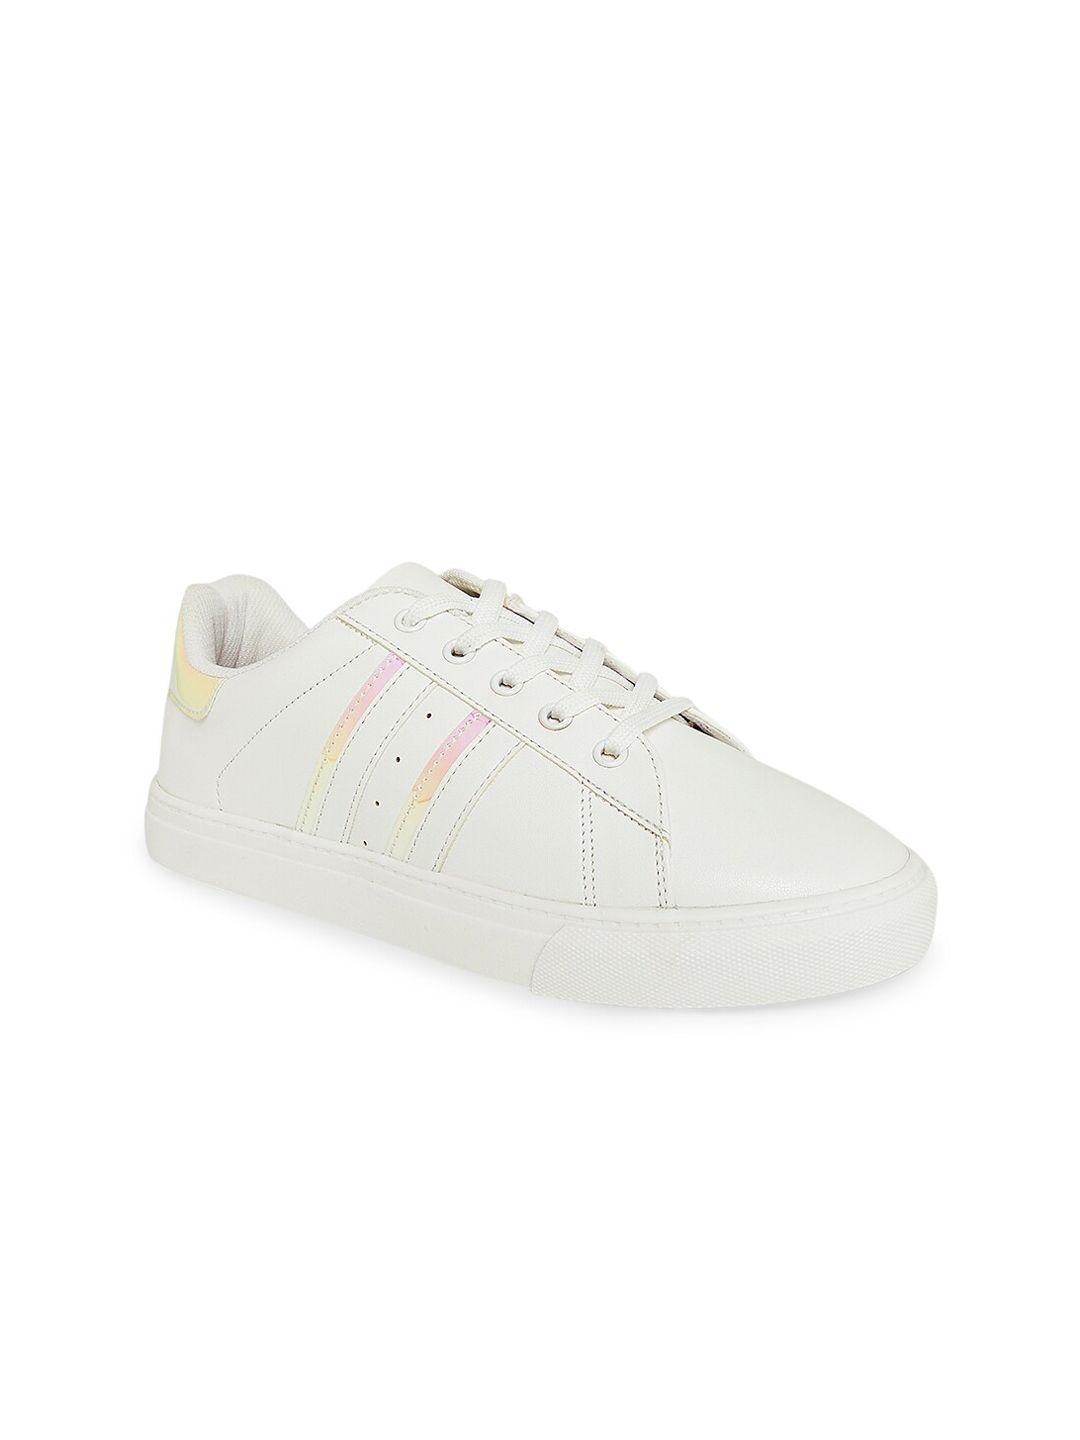 forever glam by pantaloons women white sneakers